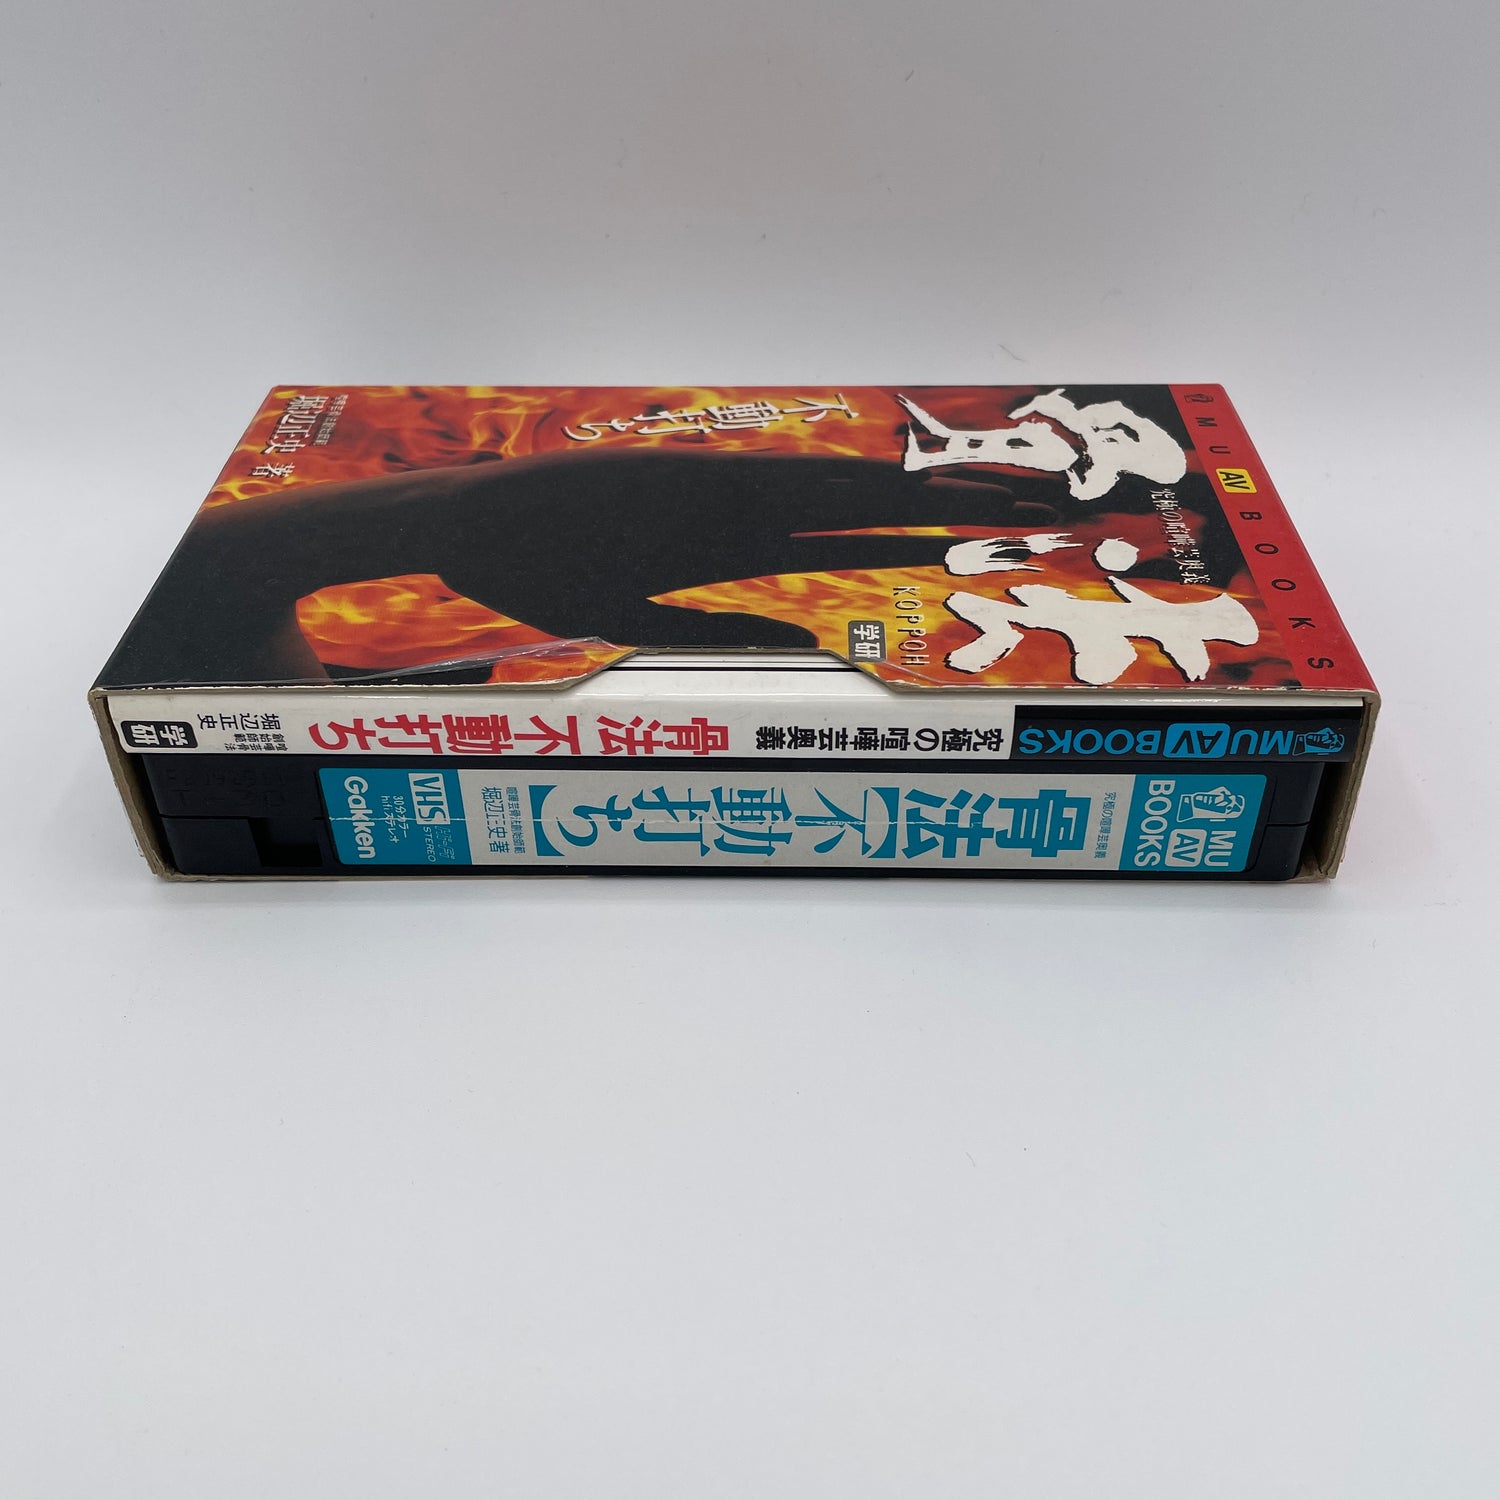 Koppo Ultimate Fighting Techniques Book & VHS by Masahi Horibe (Preowned)